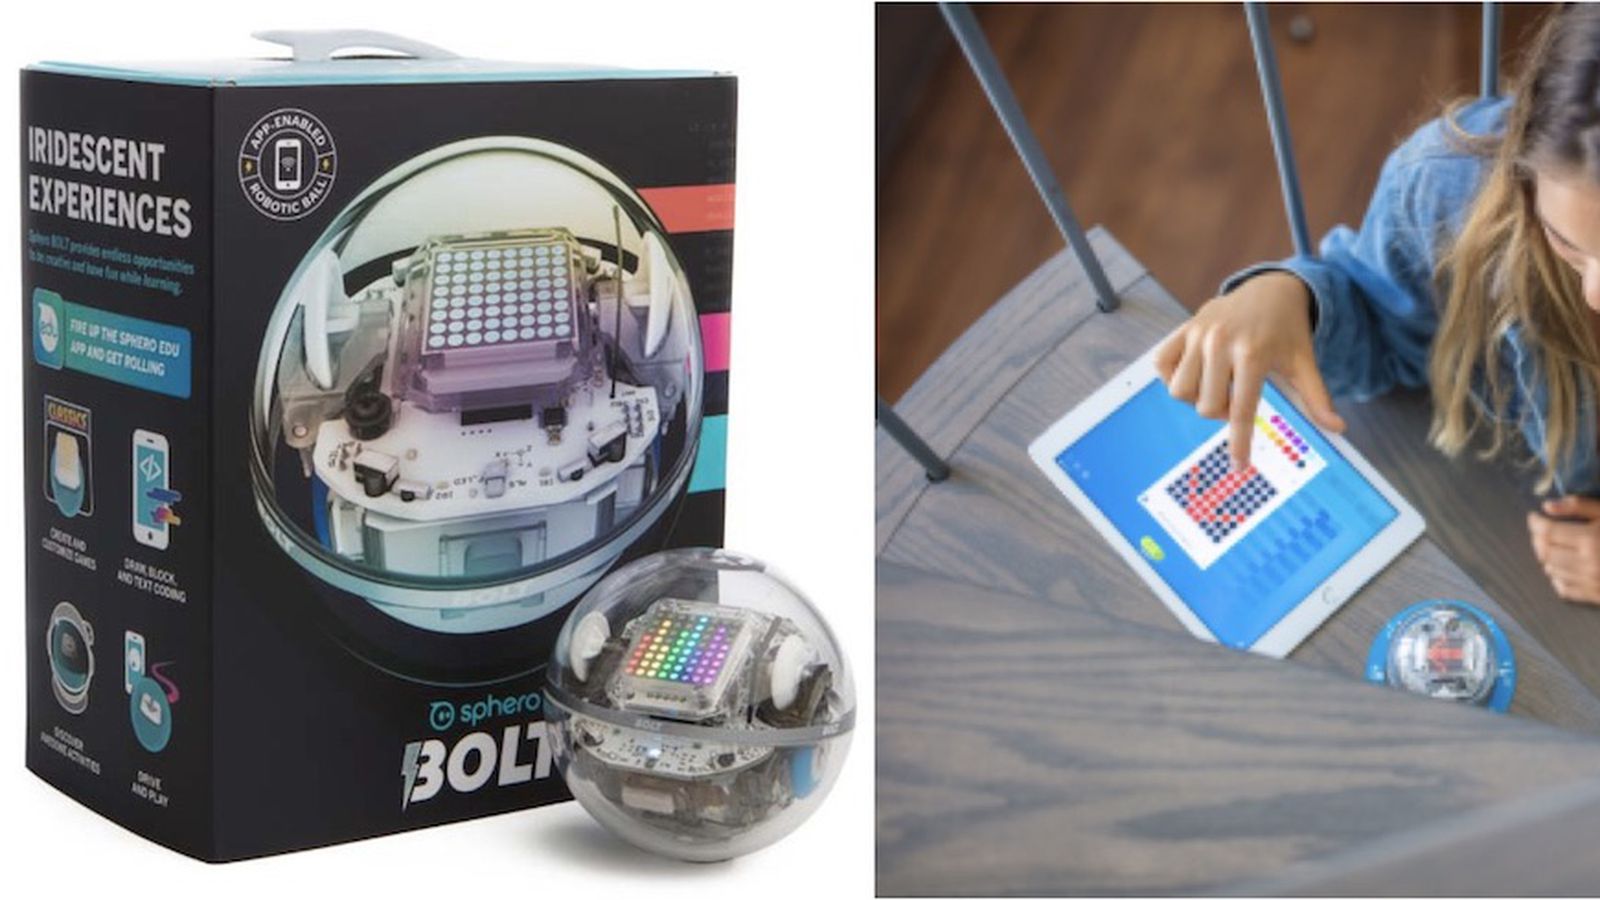 Bolt By Sphero K002 Silver App Enabled A Light-Up Robot Ball For Education 